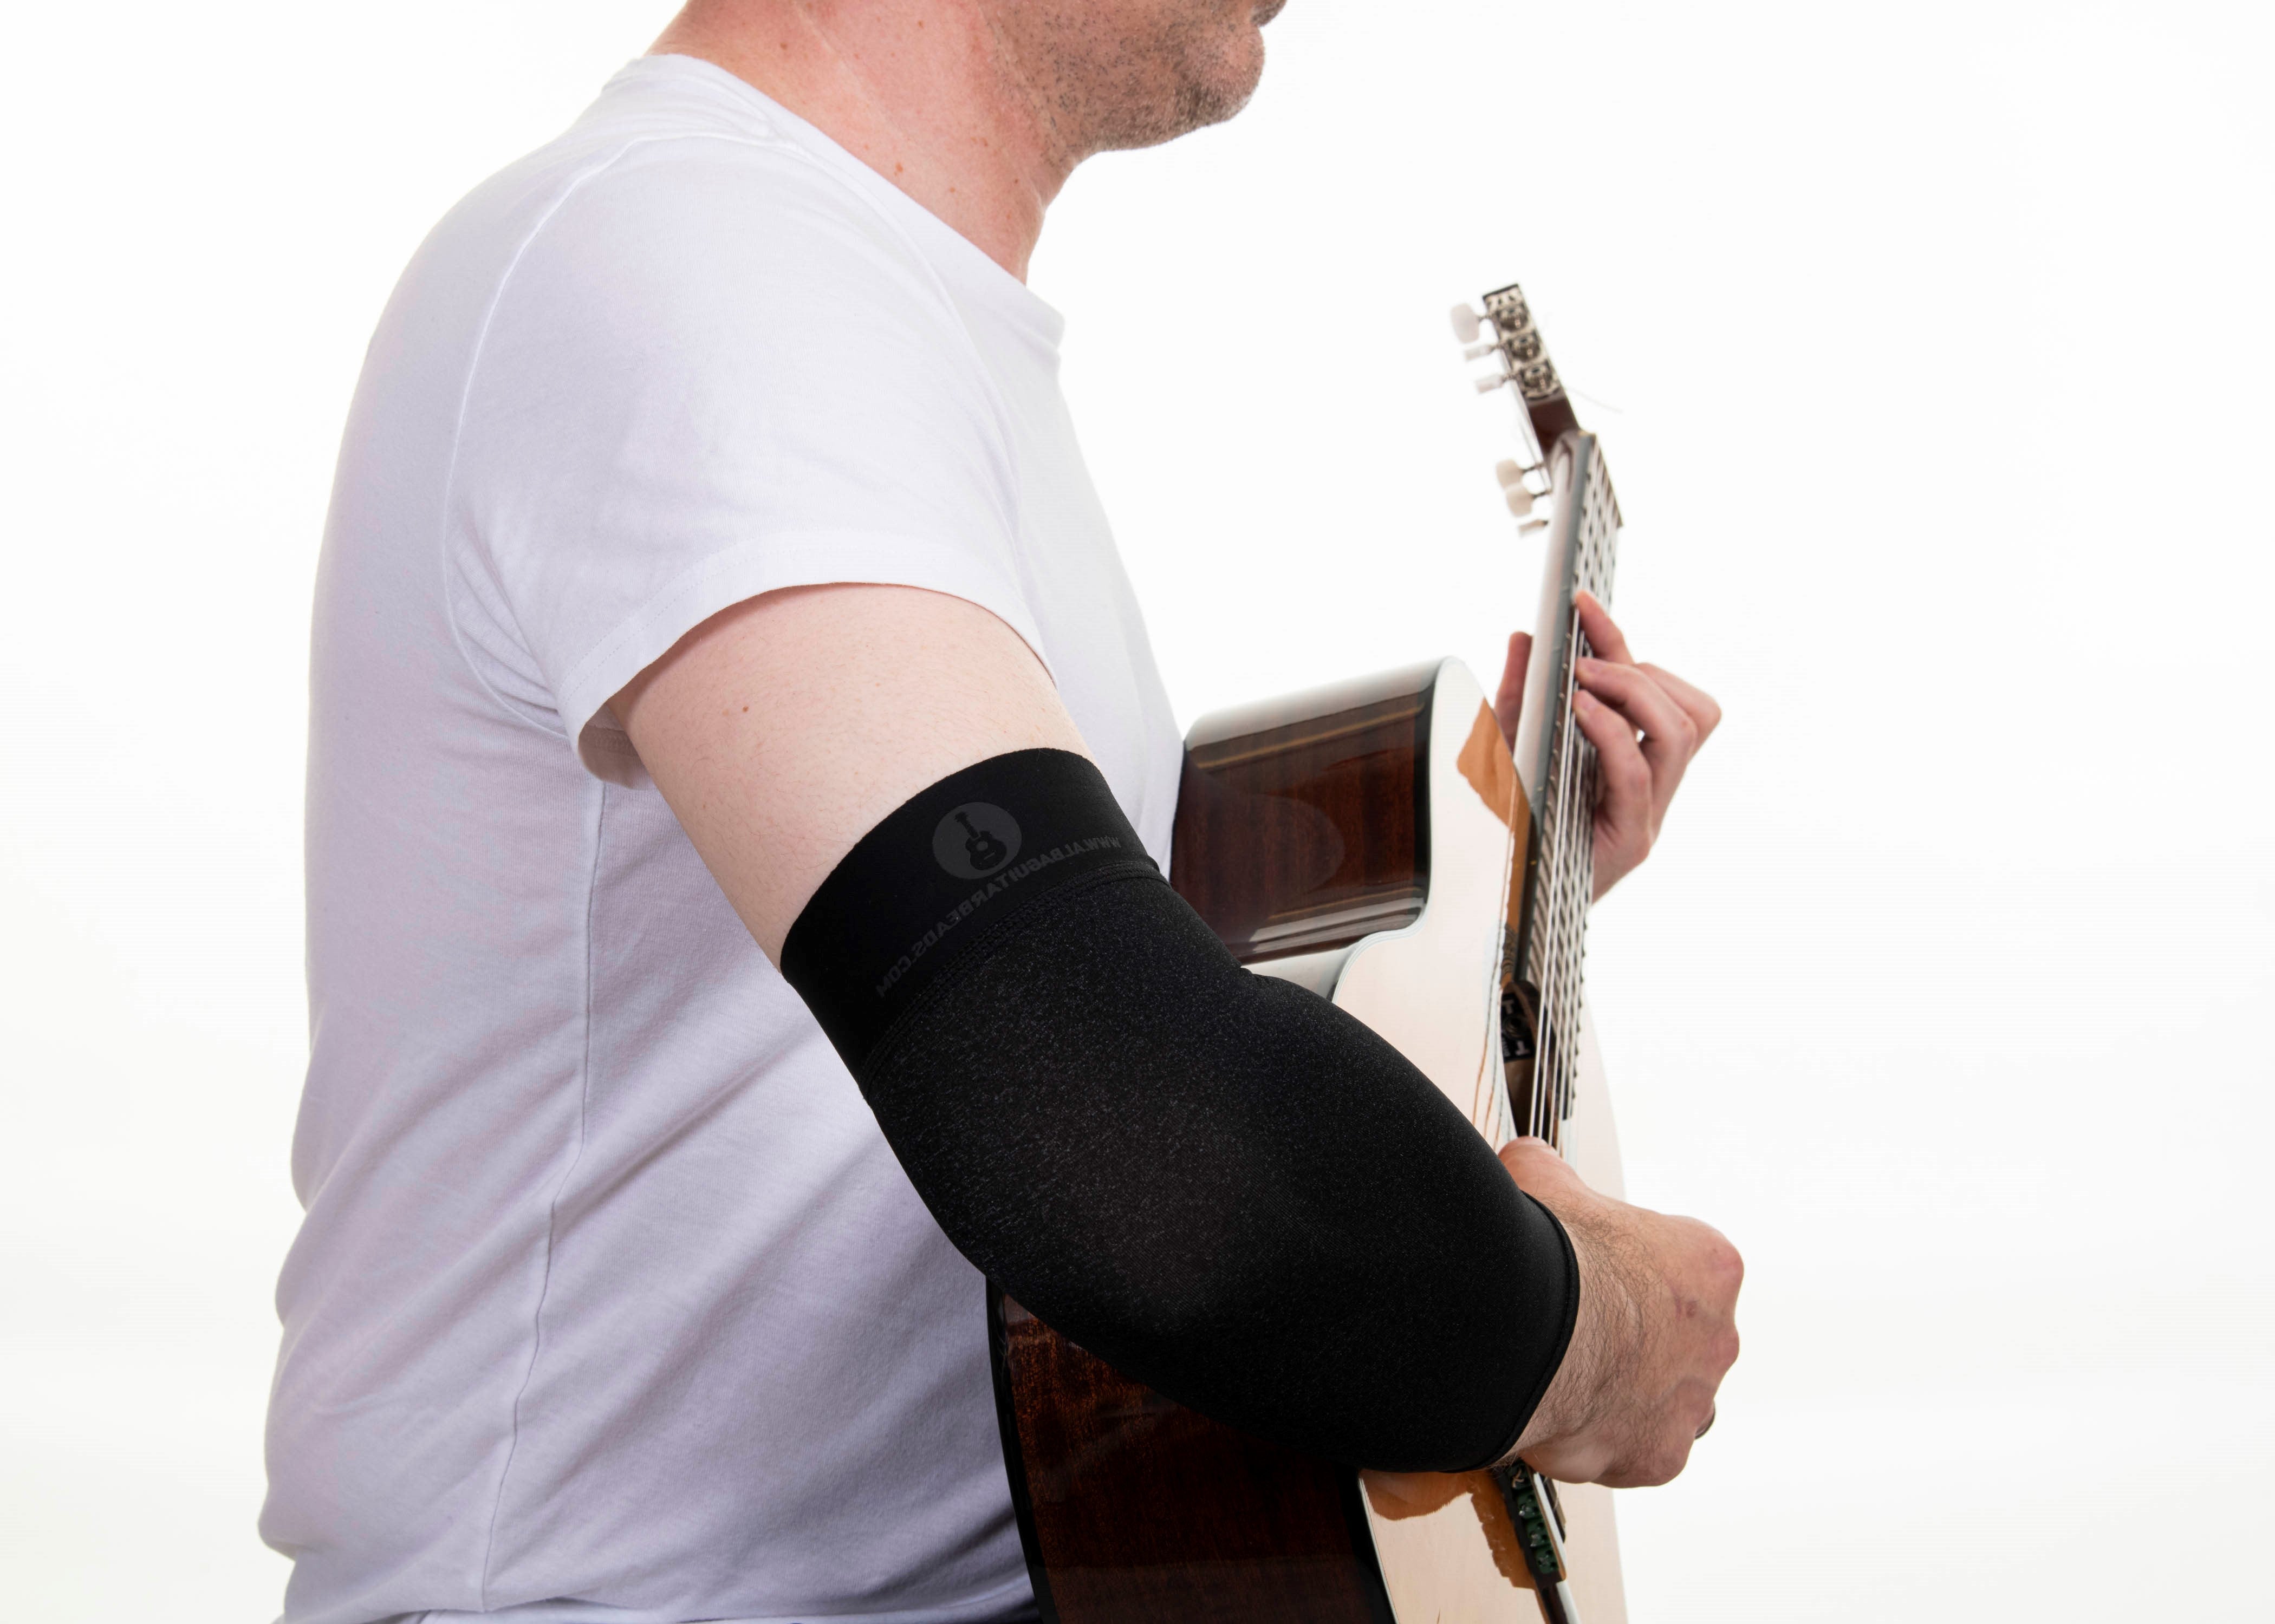 Alba Guitar Beads Black Short Sleeves - Arm protection for Classical and Flamenco guitarists